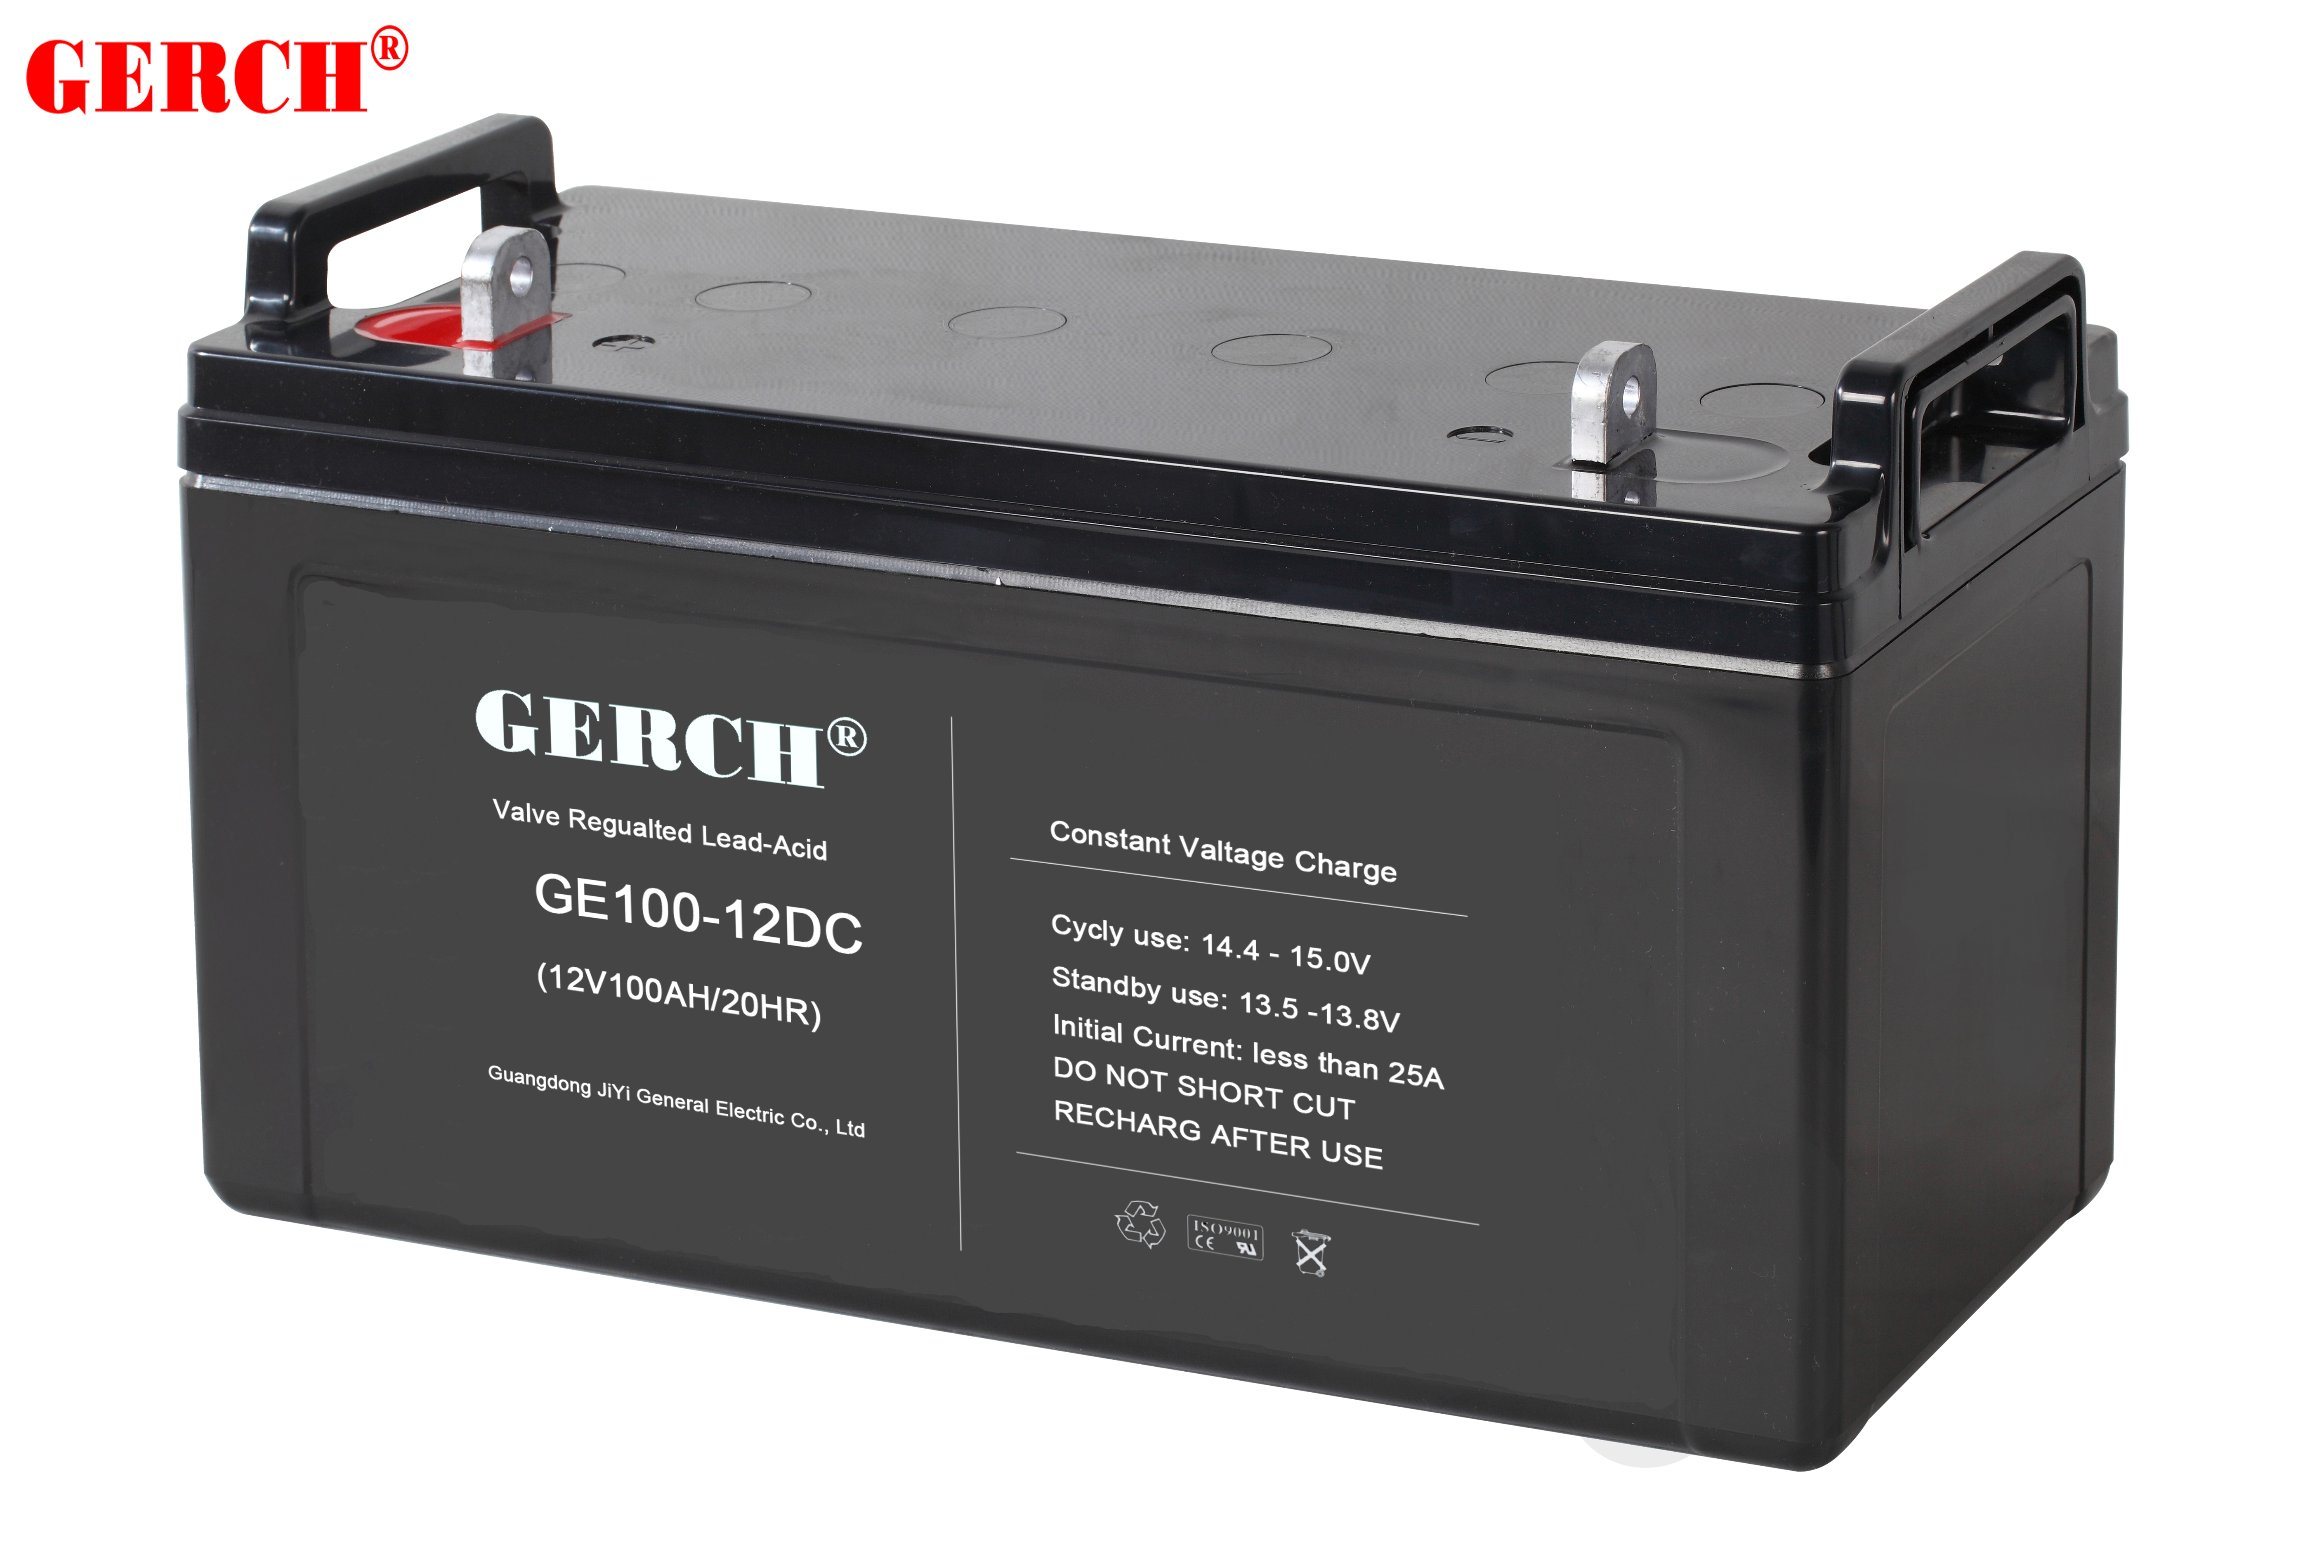 12V105ah Nano Deep Cycle Lead Acid Battery for Forklift, Wheel Chair, Scooter, Electricity Power, Power Plant, Vehicle, Robot